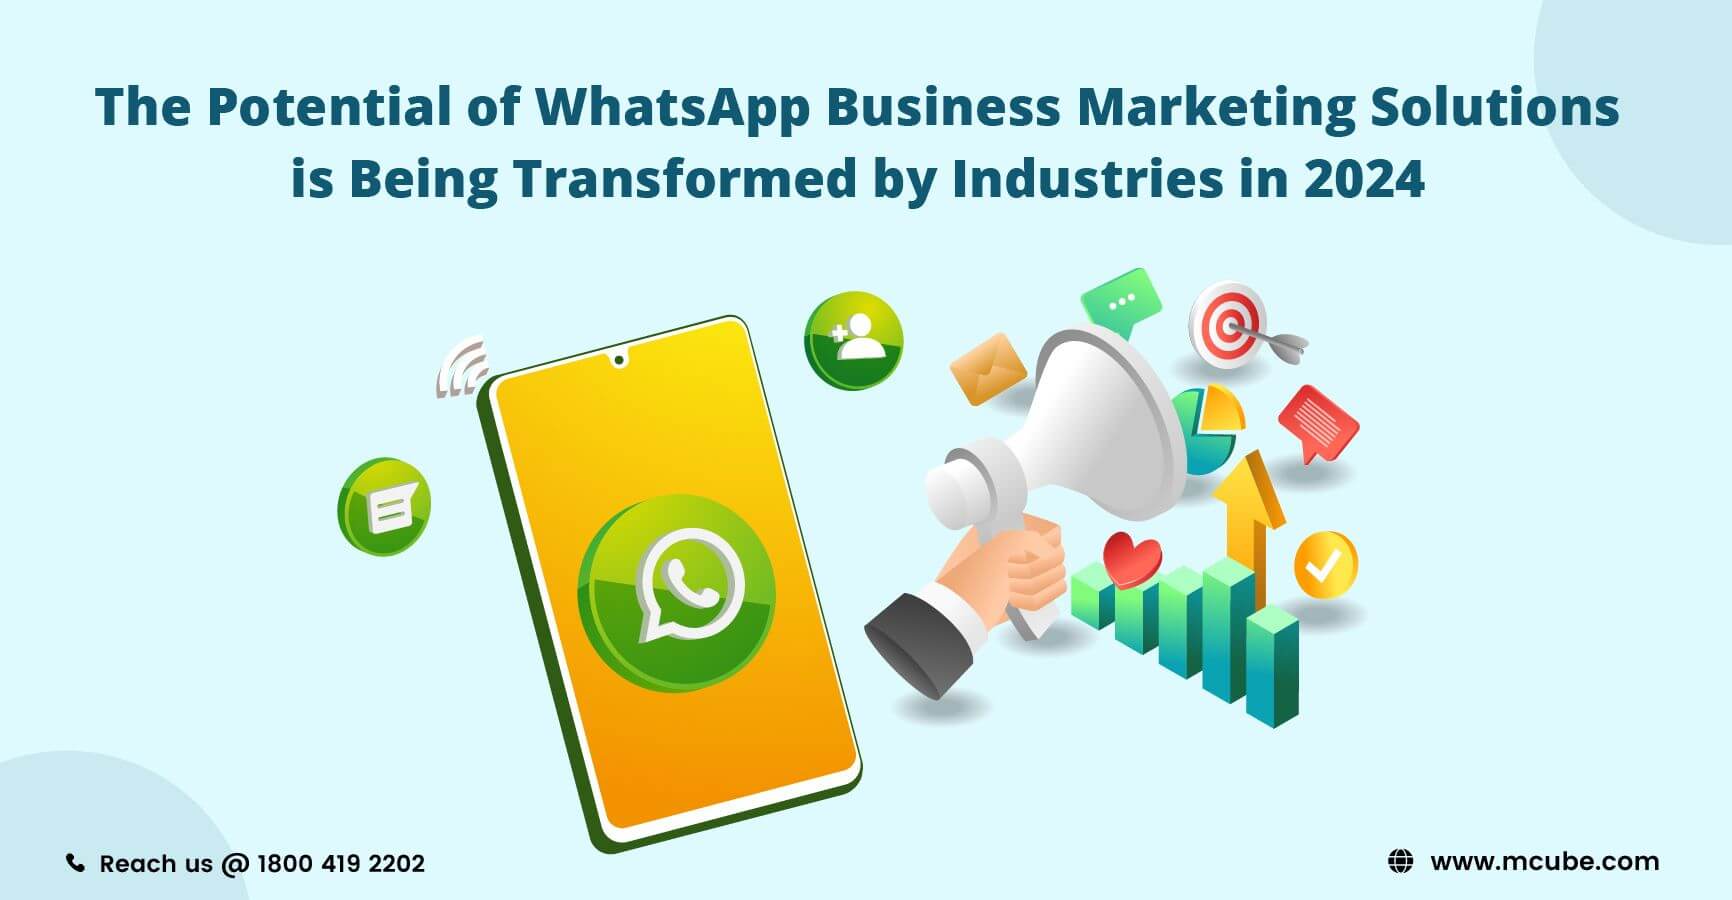 The Potential of WhatsApp Business Marketing Solutions is Being Transformed by Industries in 2024